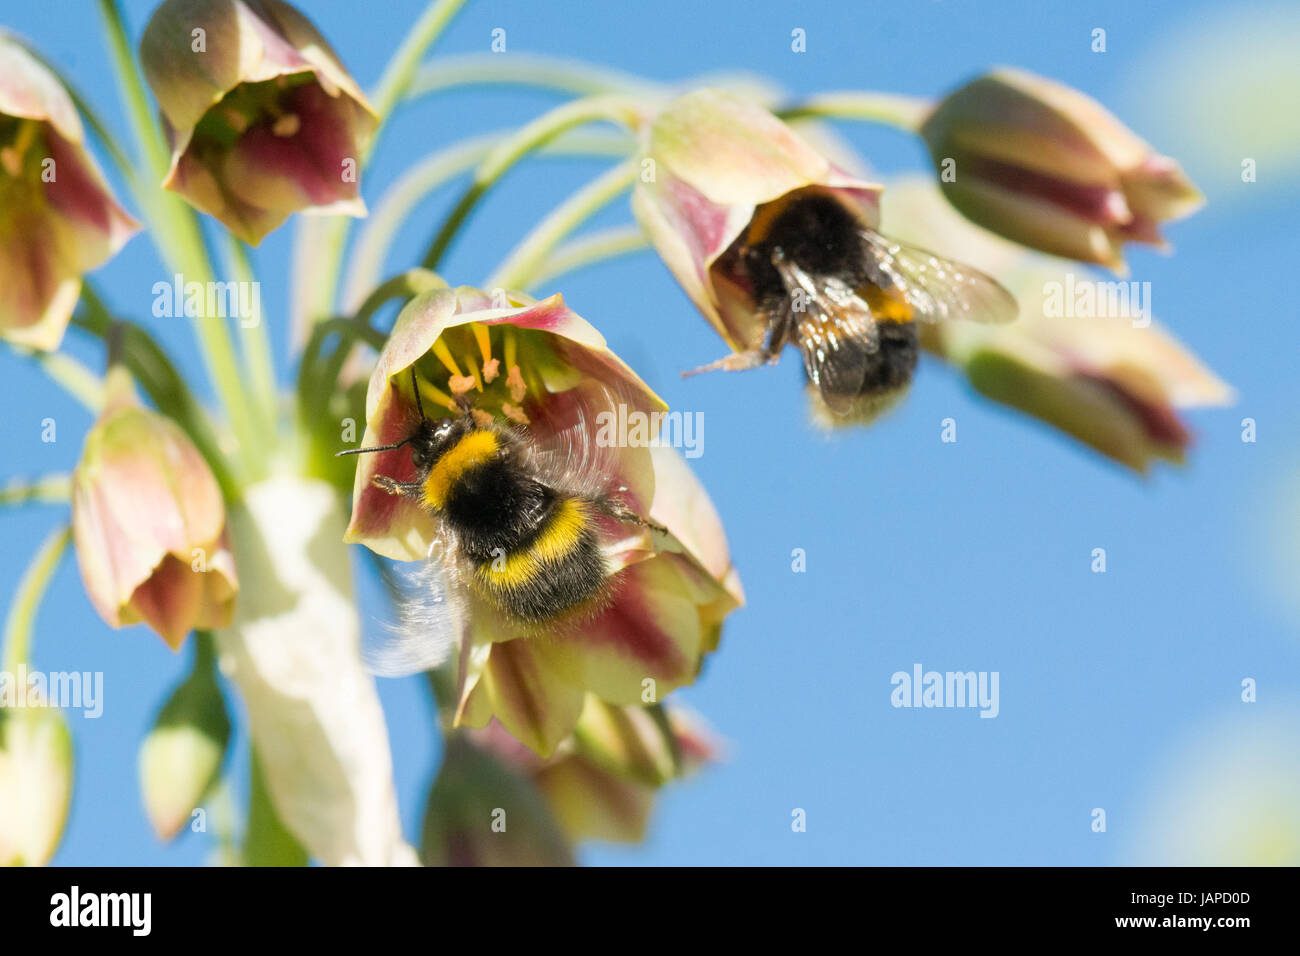 Sicillian honey garlic, Nectaroscordum siculum.                         Stirlingshire, Scotland, UK. 7th June, 2017. UK weather - blue skies in Stirlingshire as bumblebees drink nectar from Honey Garlic flowers ahead of the rain forecast tomorrow Credit: Kay Roxby/Alamy Live News Stock Photo